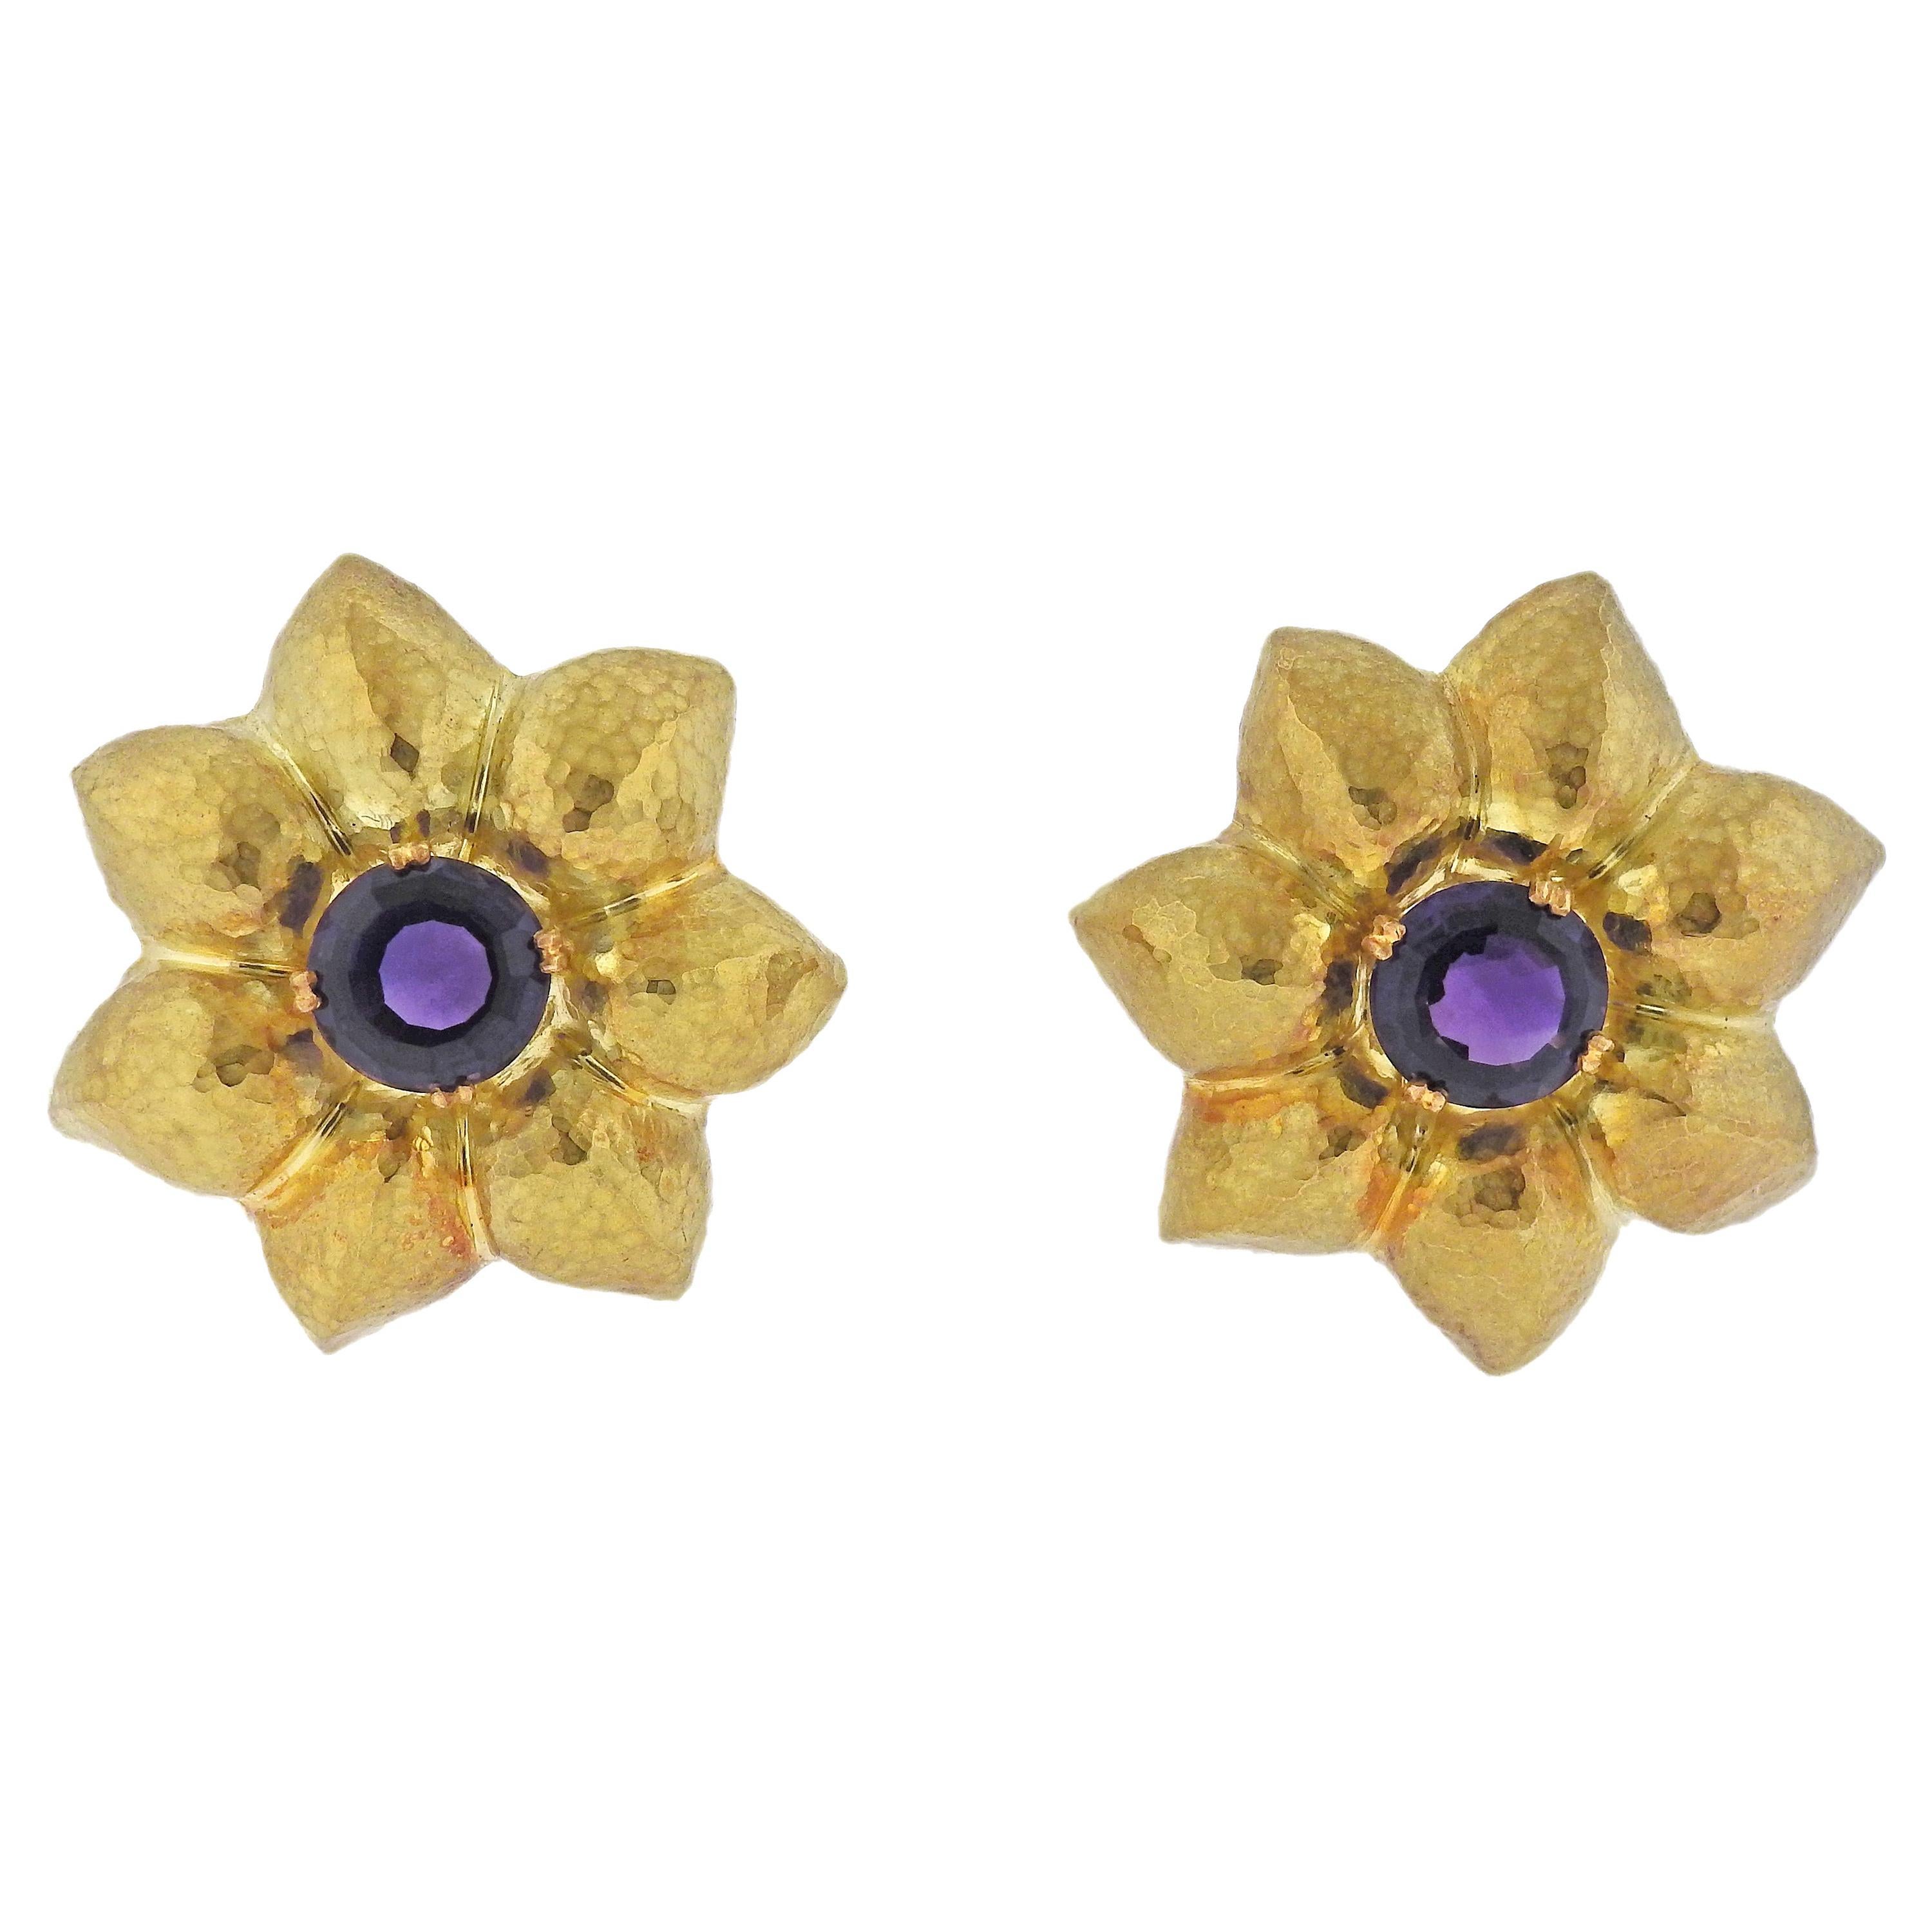 Tiffany & Co. Paloma Picasso Amethyst Gold Flower Earrings